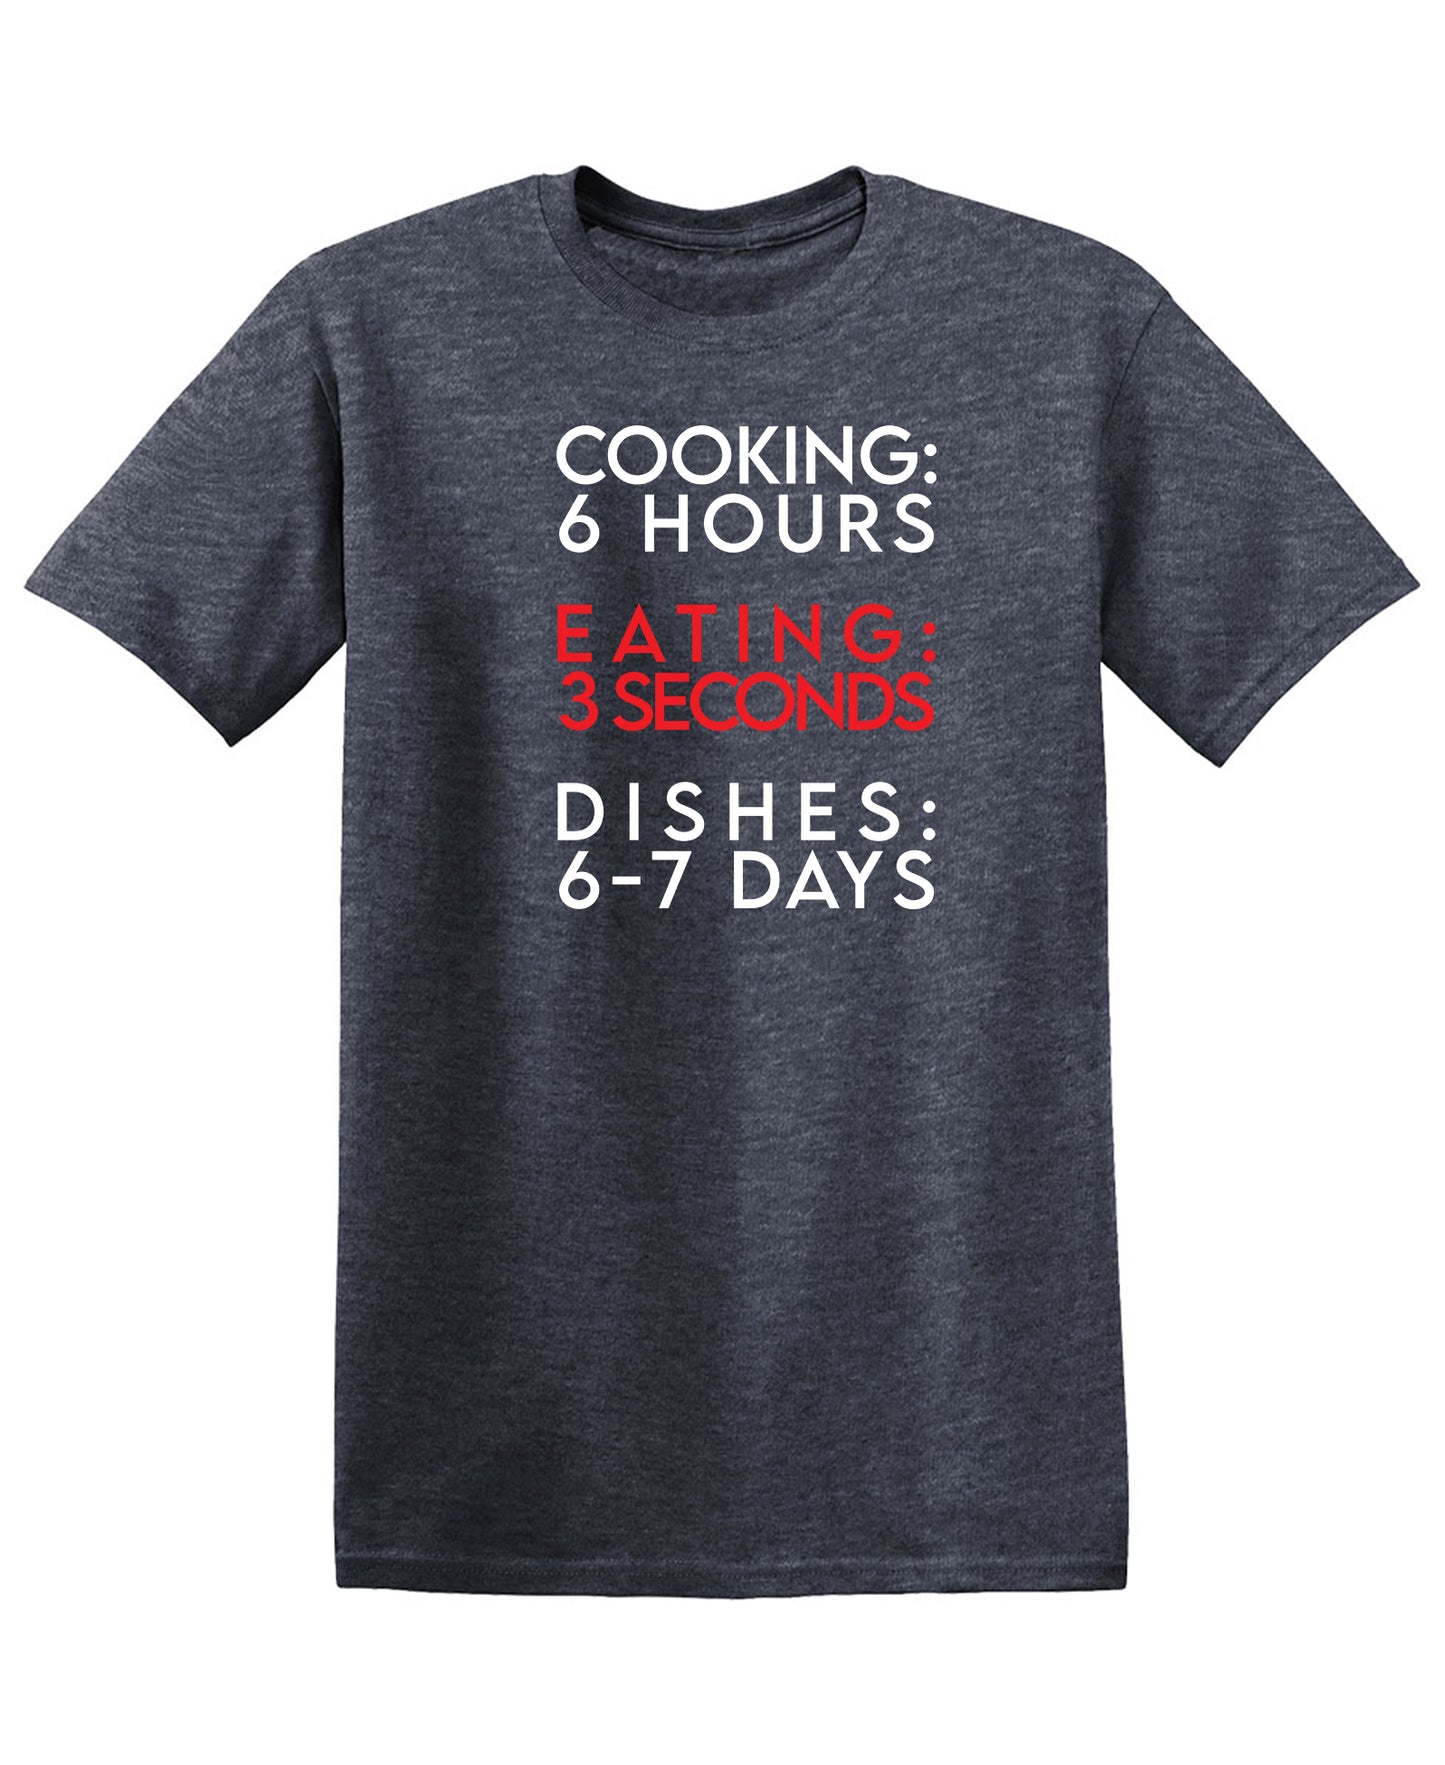 Funny T-Shirts design "Cooking 6 Hours, Eating 3 Seconds, Dishers 6-7 Days Funny Tee"